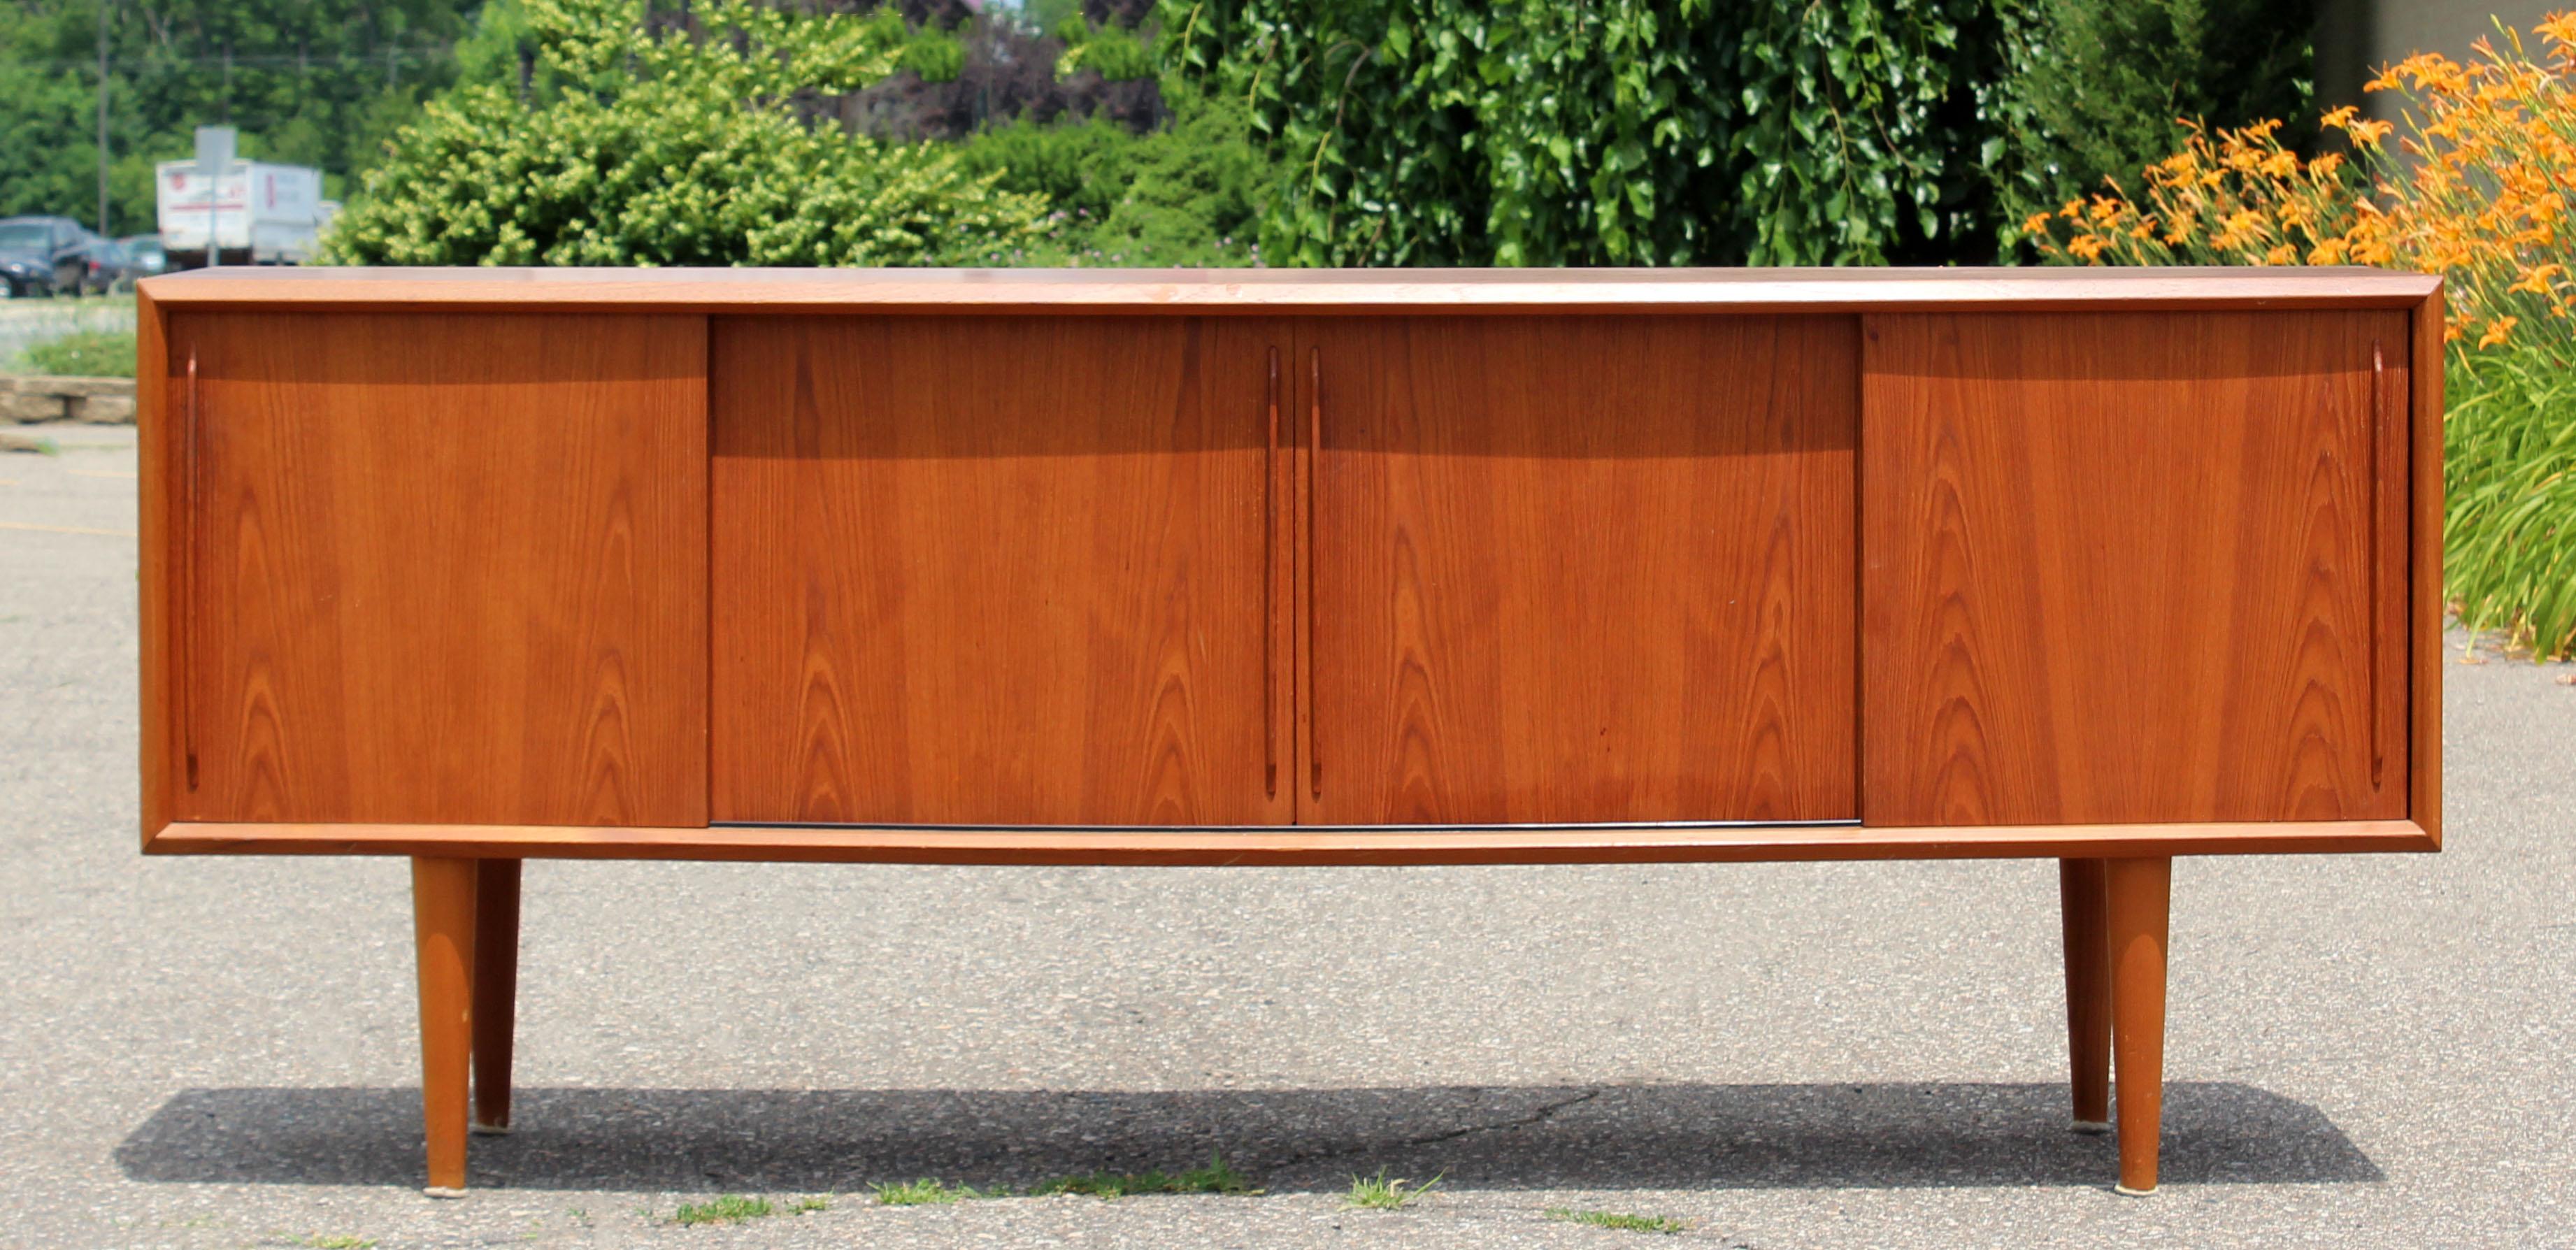 For your consideration is a magnificent, teak credenza with four shelves and four drawers by Arne Vodder for H.P. Hansen, made in Denmark, circa 1960s. In very good condition. The dimensions are 79